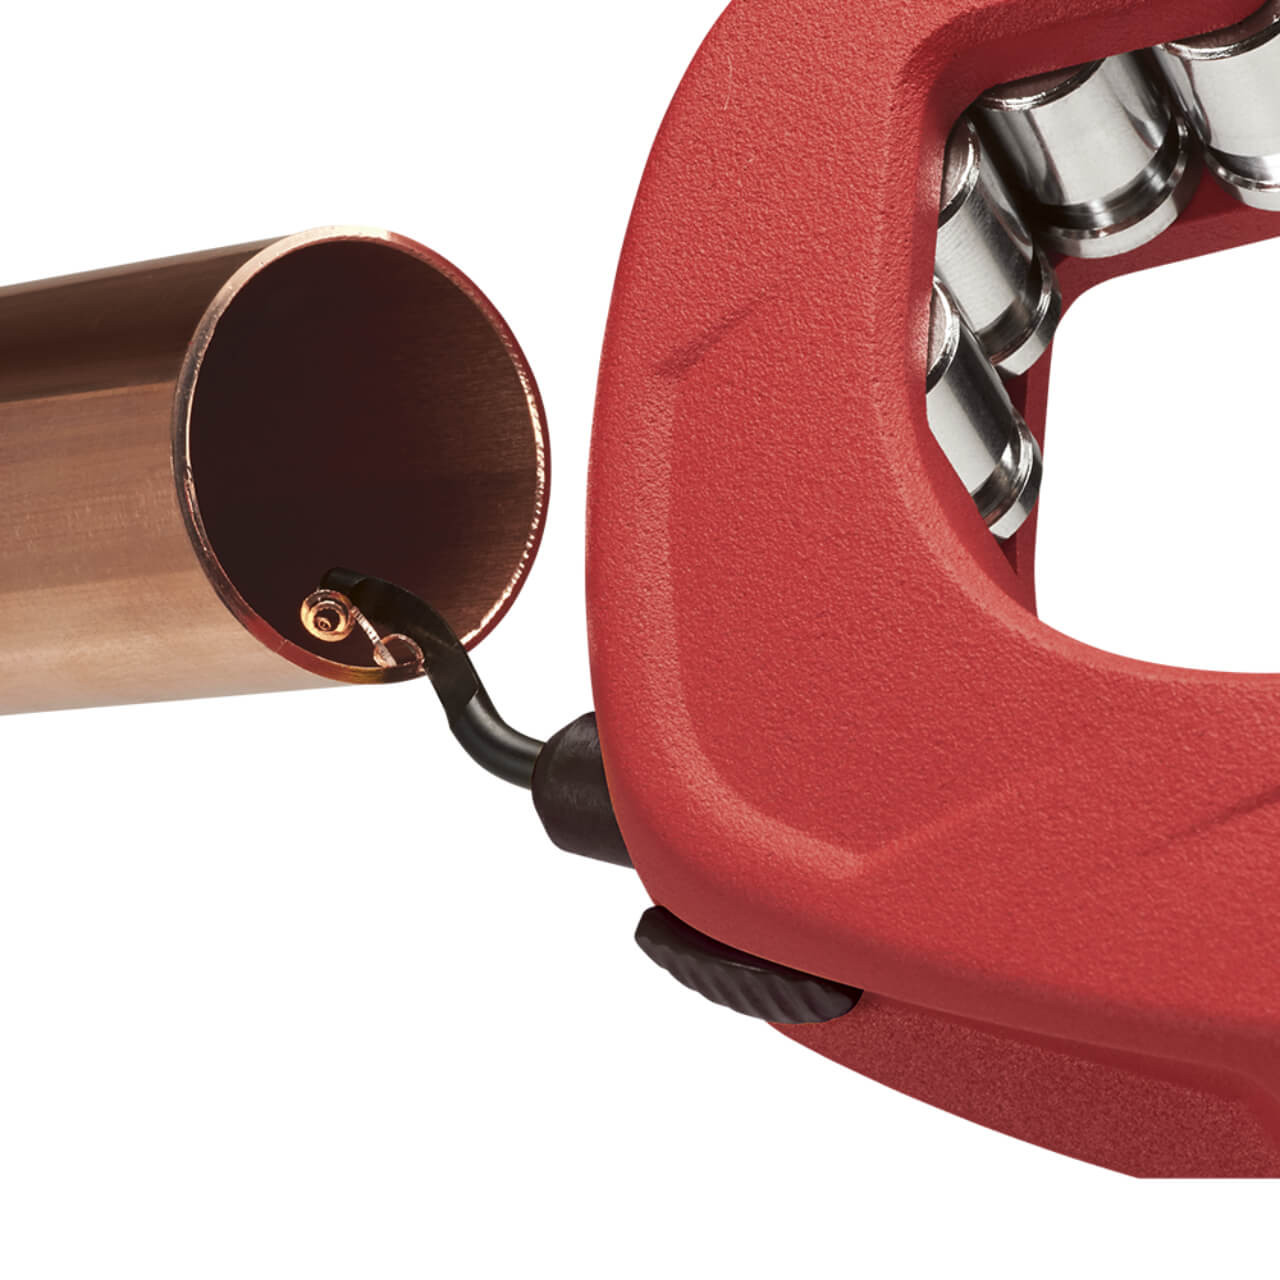 Milwaukee 38mm Constant Swing Copper Tube Cutter